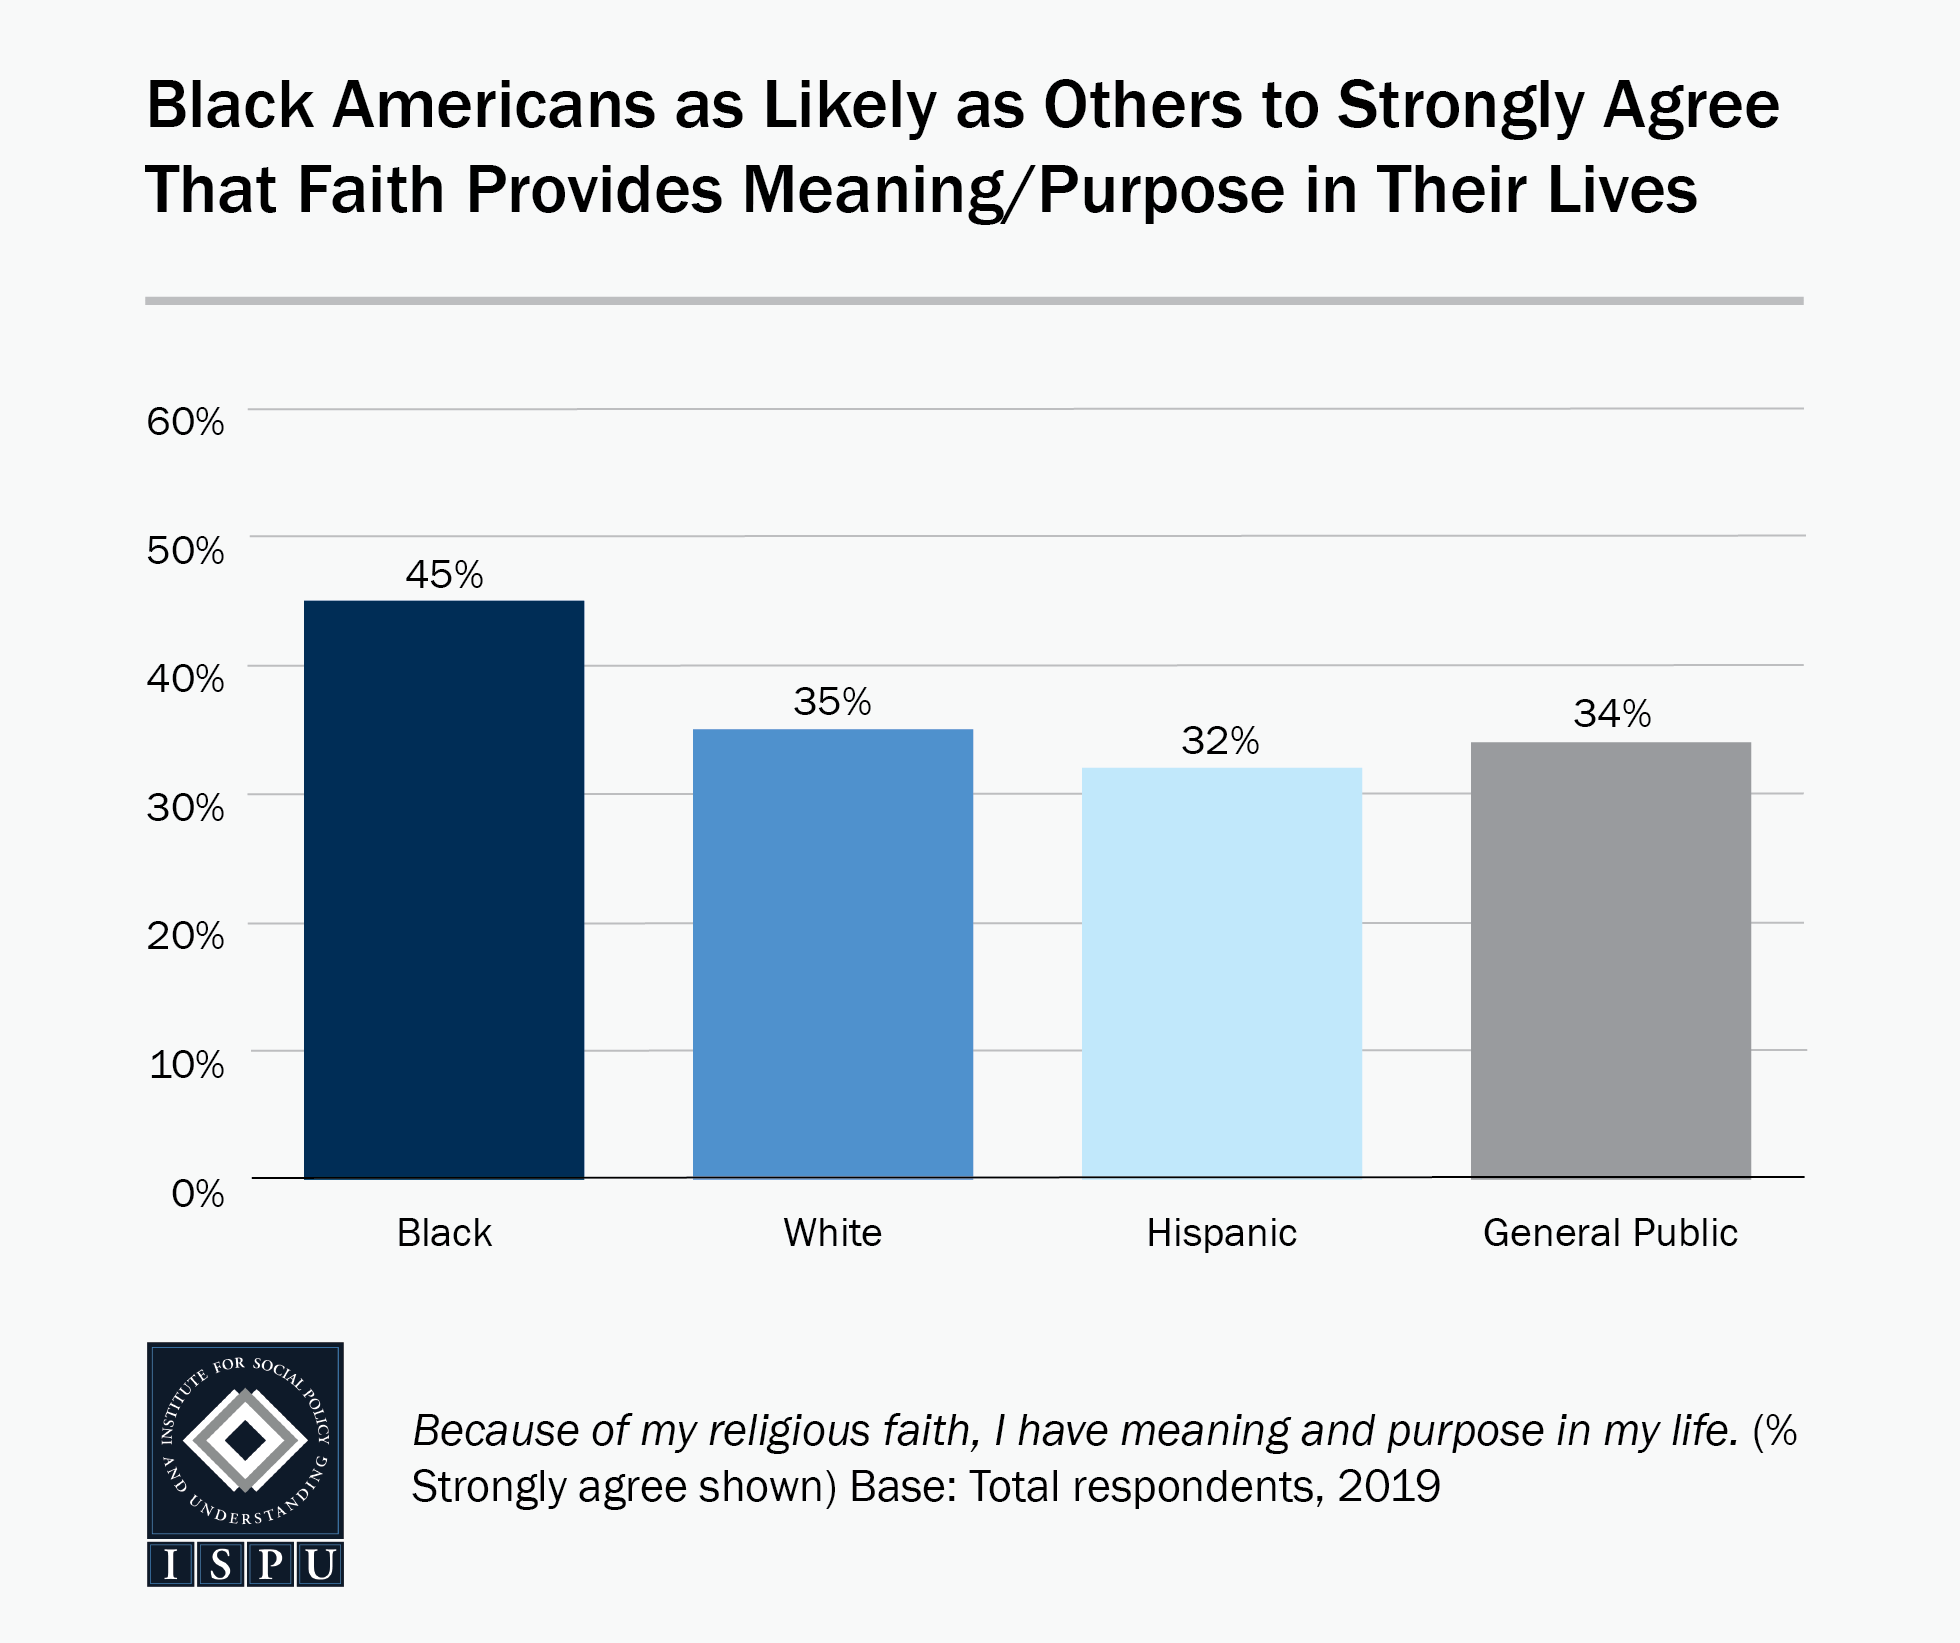 Bar graph showing that Black Americans (45%) are as likely as others (32%-35%) to strongly agree that faith provides meaning and purpose in their lives